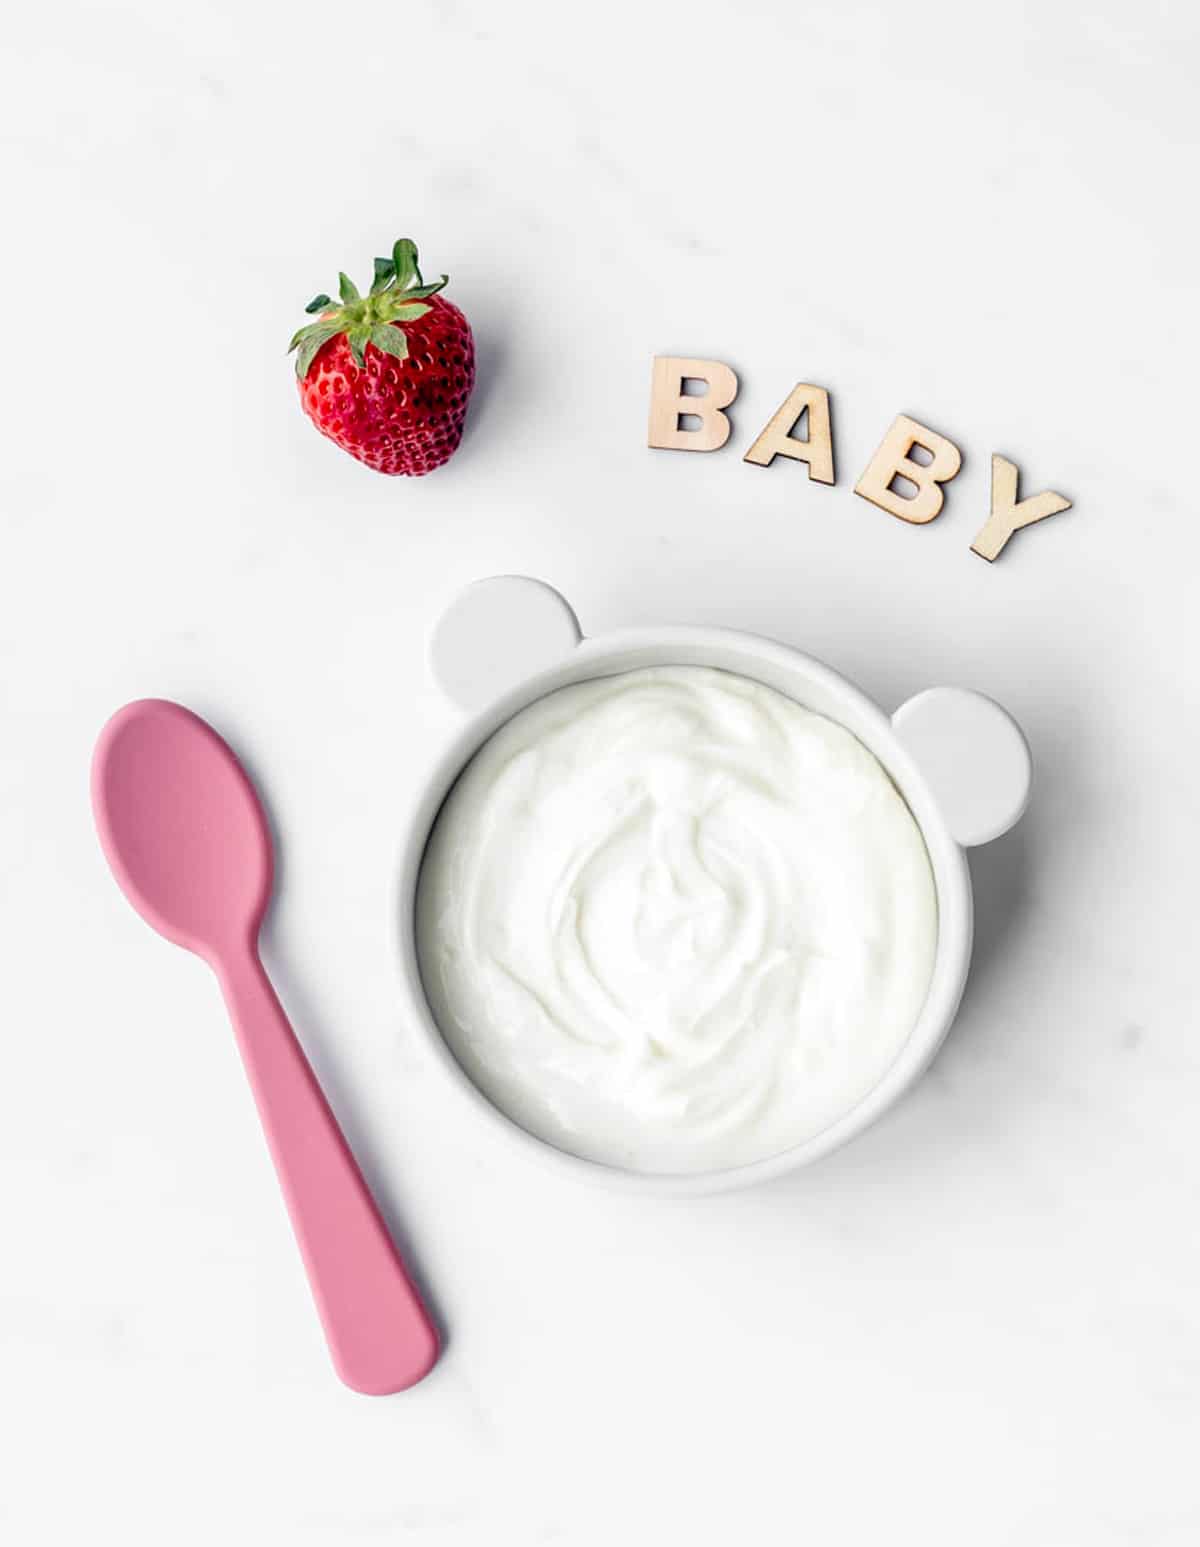 A bowl of yogurt next to a spoon, strawberry and word baby spelled out with wooden letters.